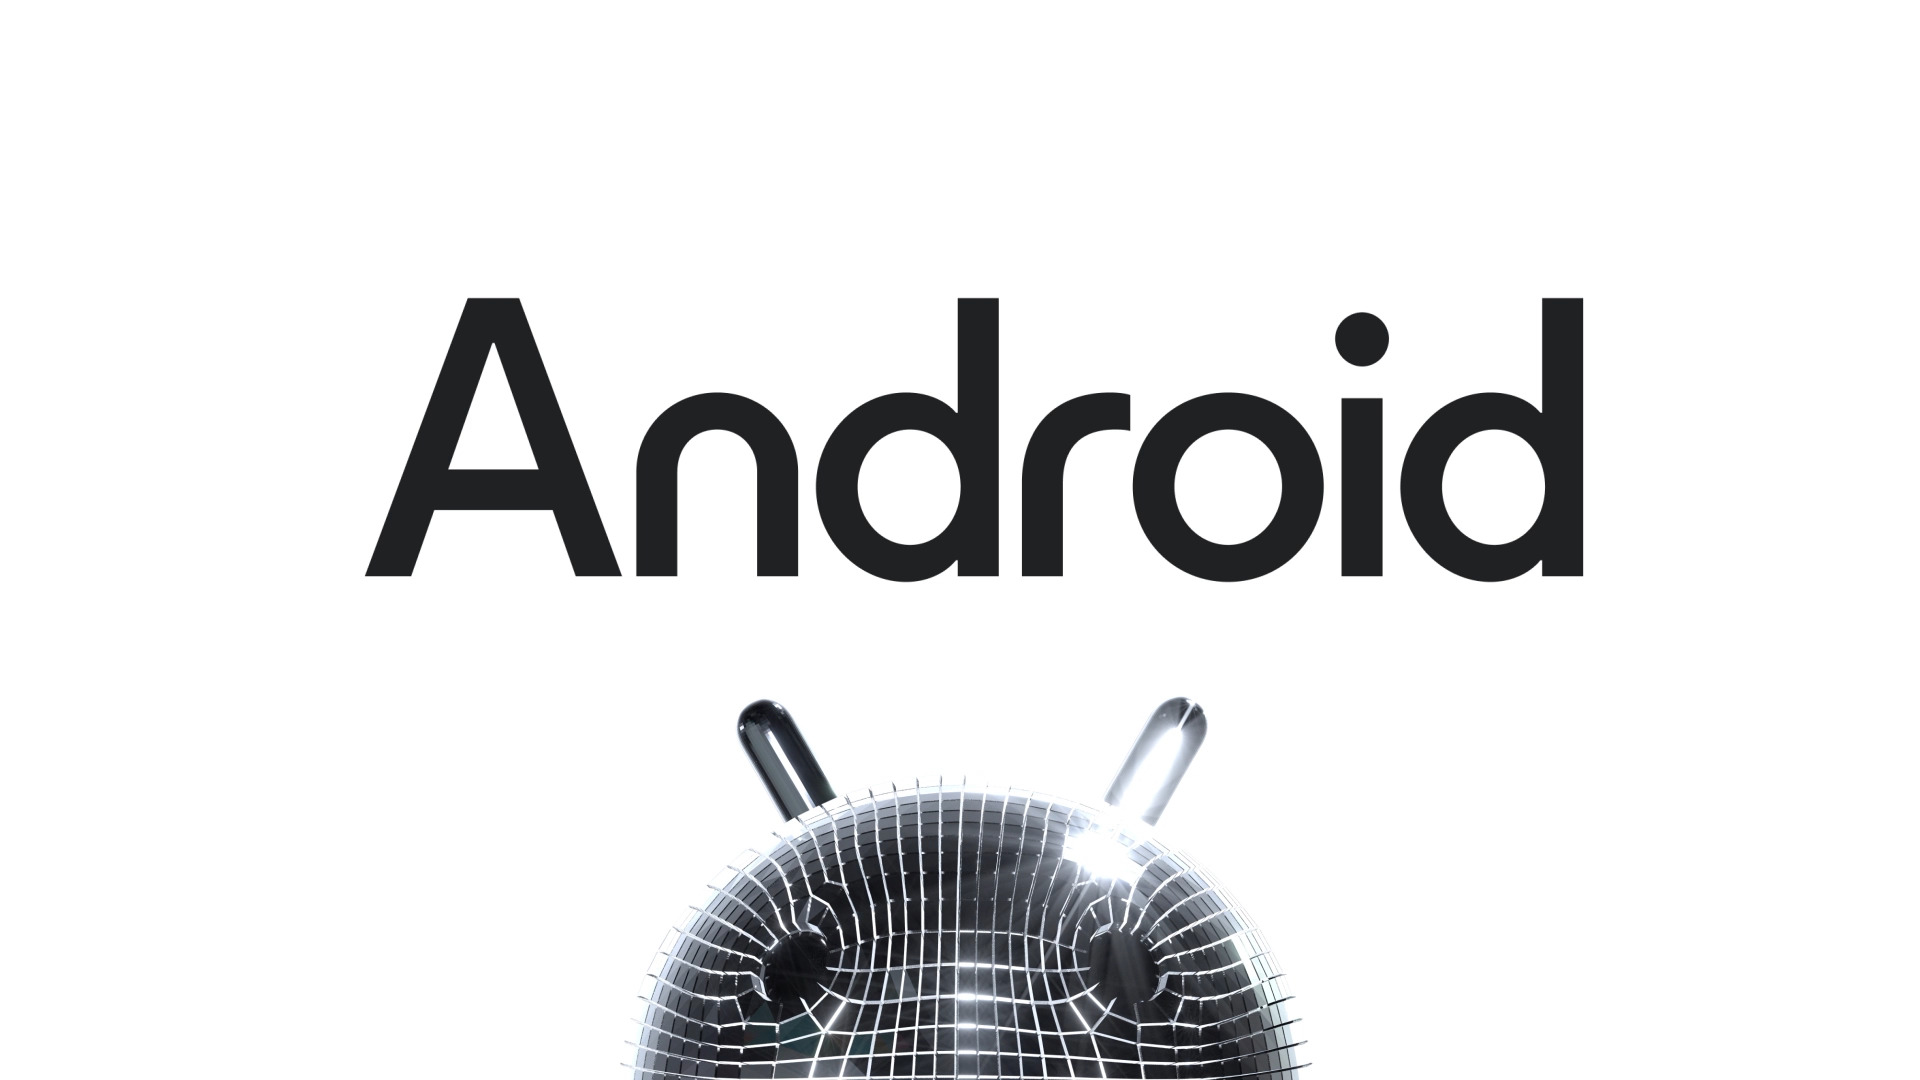 Android brand logo (courtesy of Android Developers)